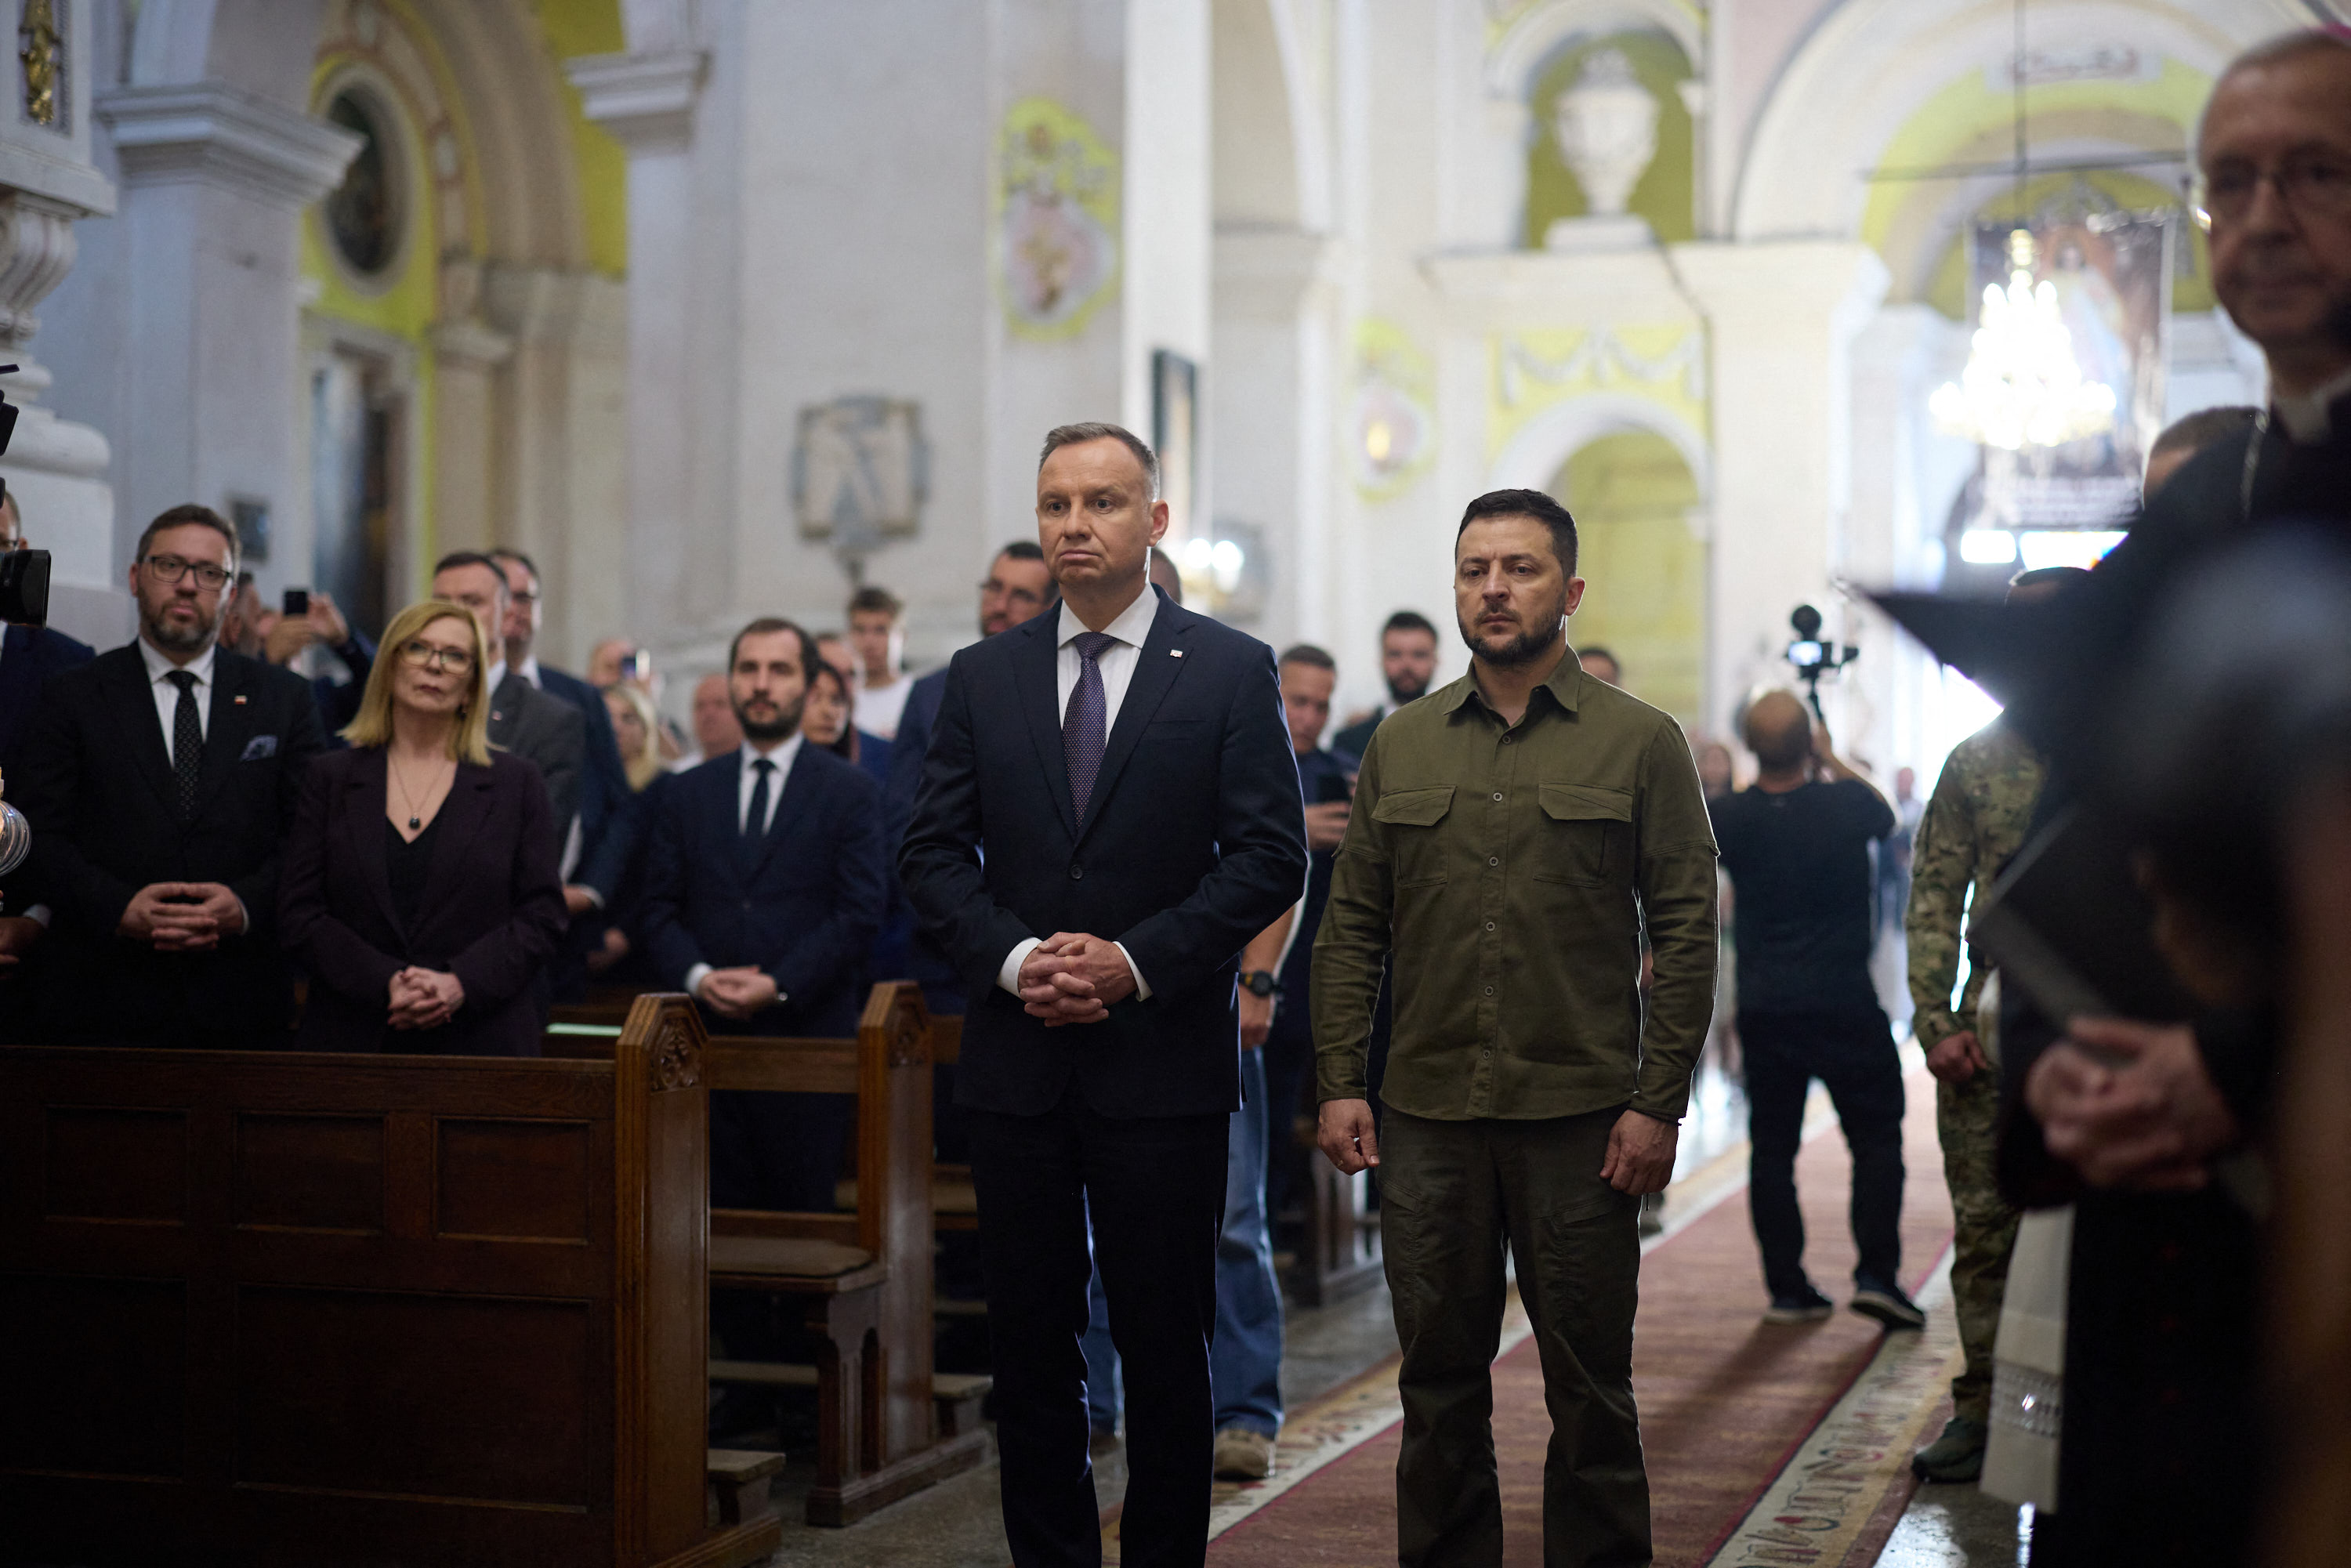 On 9 July 2023, President Volodymyr Zelensky and President Andrzej Duda commemorate the victims of the Volhynia Massacre at the Cathedral of Saints Peter and Paul in Lutsk, Ukraine. © Ukrainian Presidency / Abaca Press via Reuters.